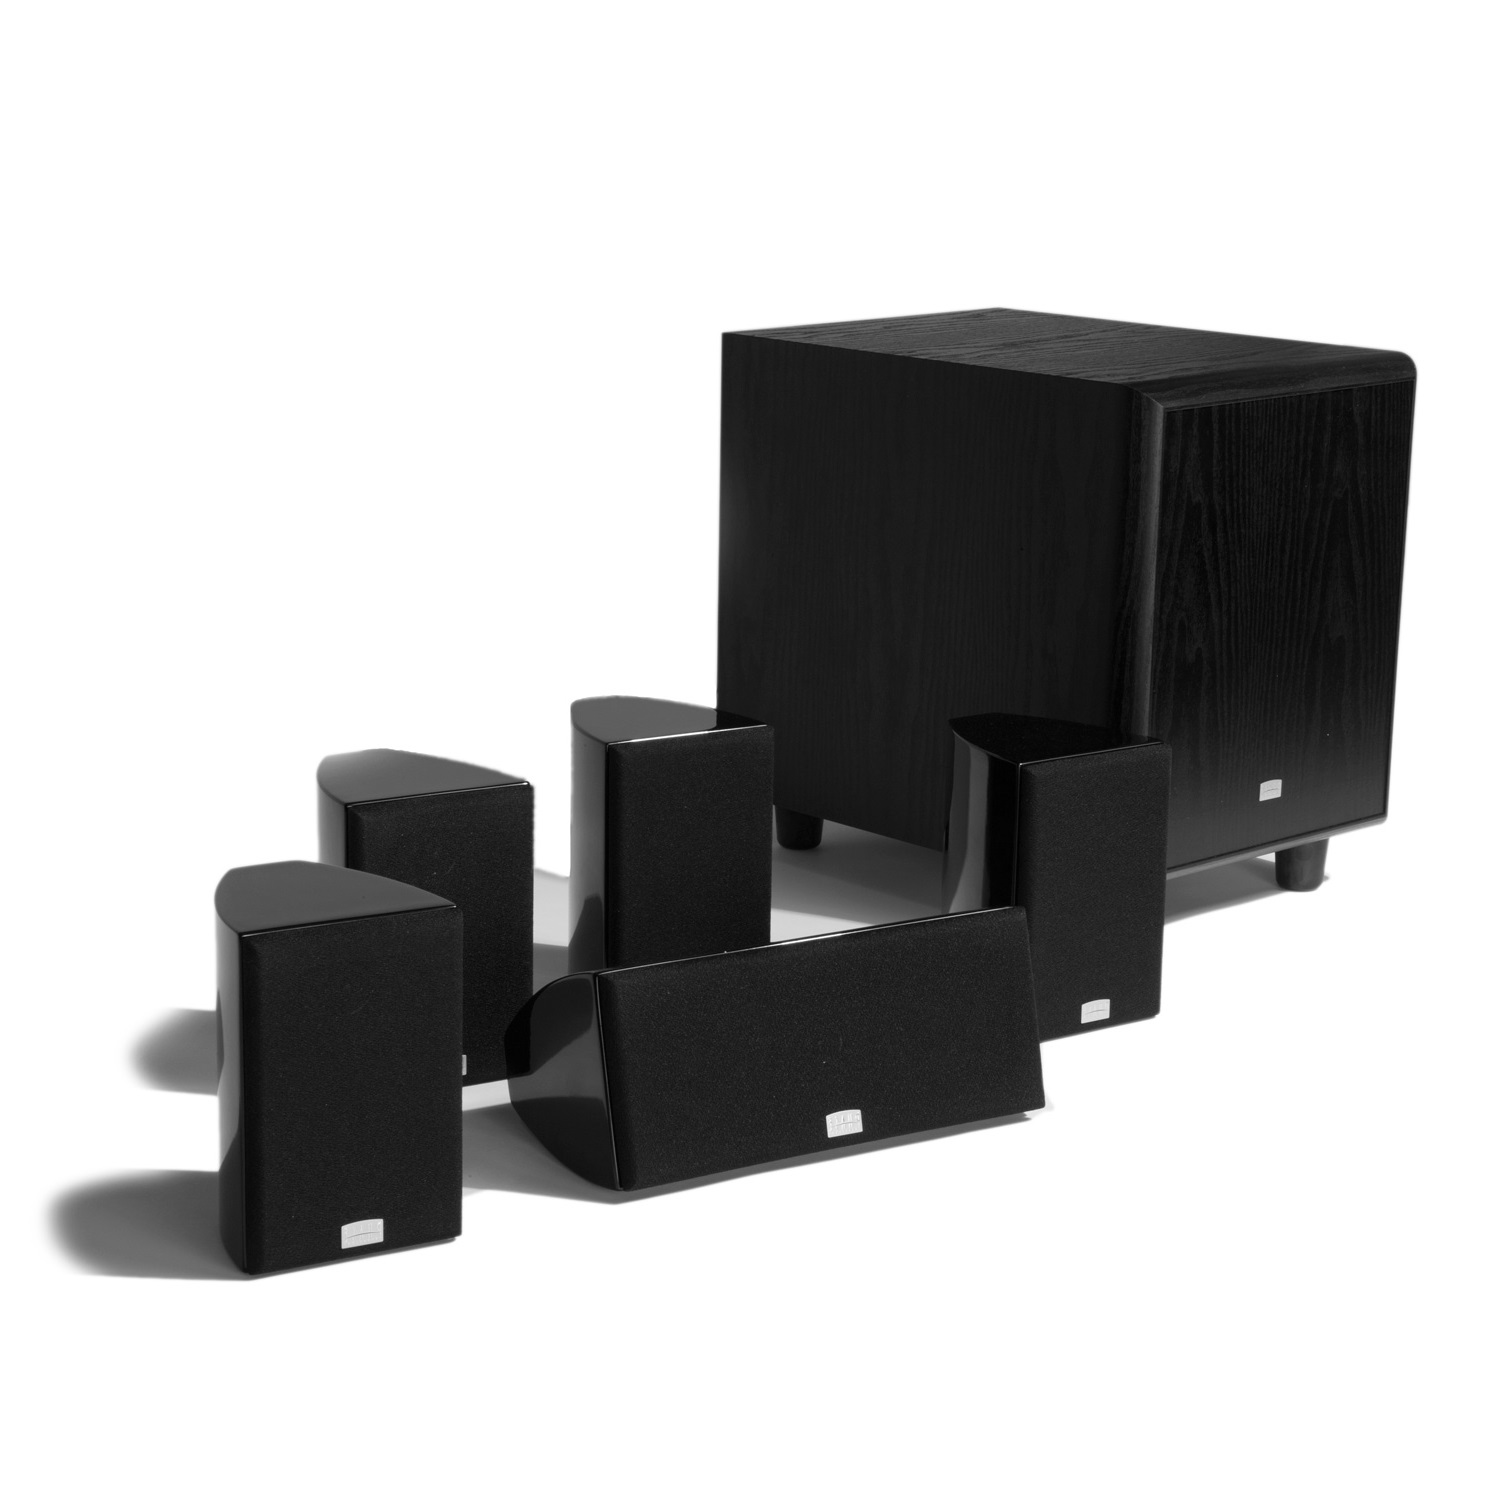 Phase CineMicro System 2-way, switchable bipole/dipole surround speaker (black)(each) - Click Image to Close